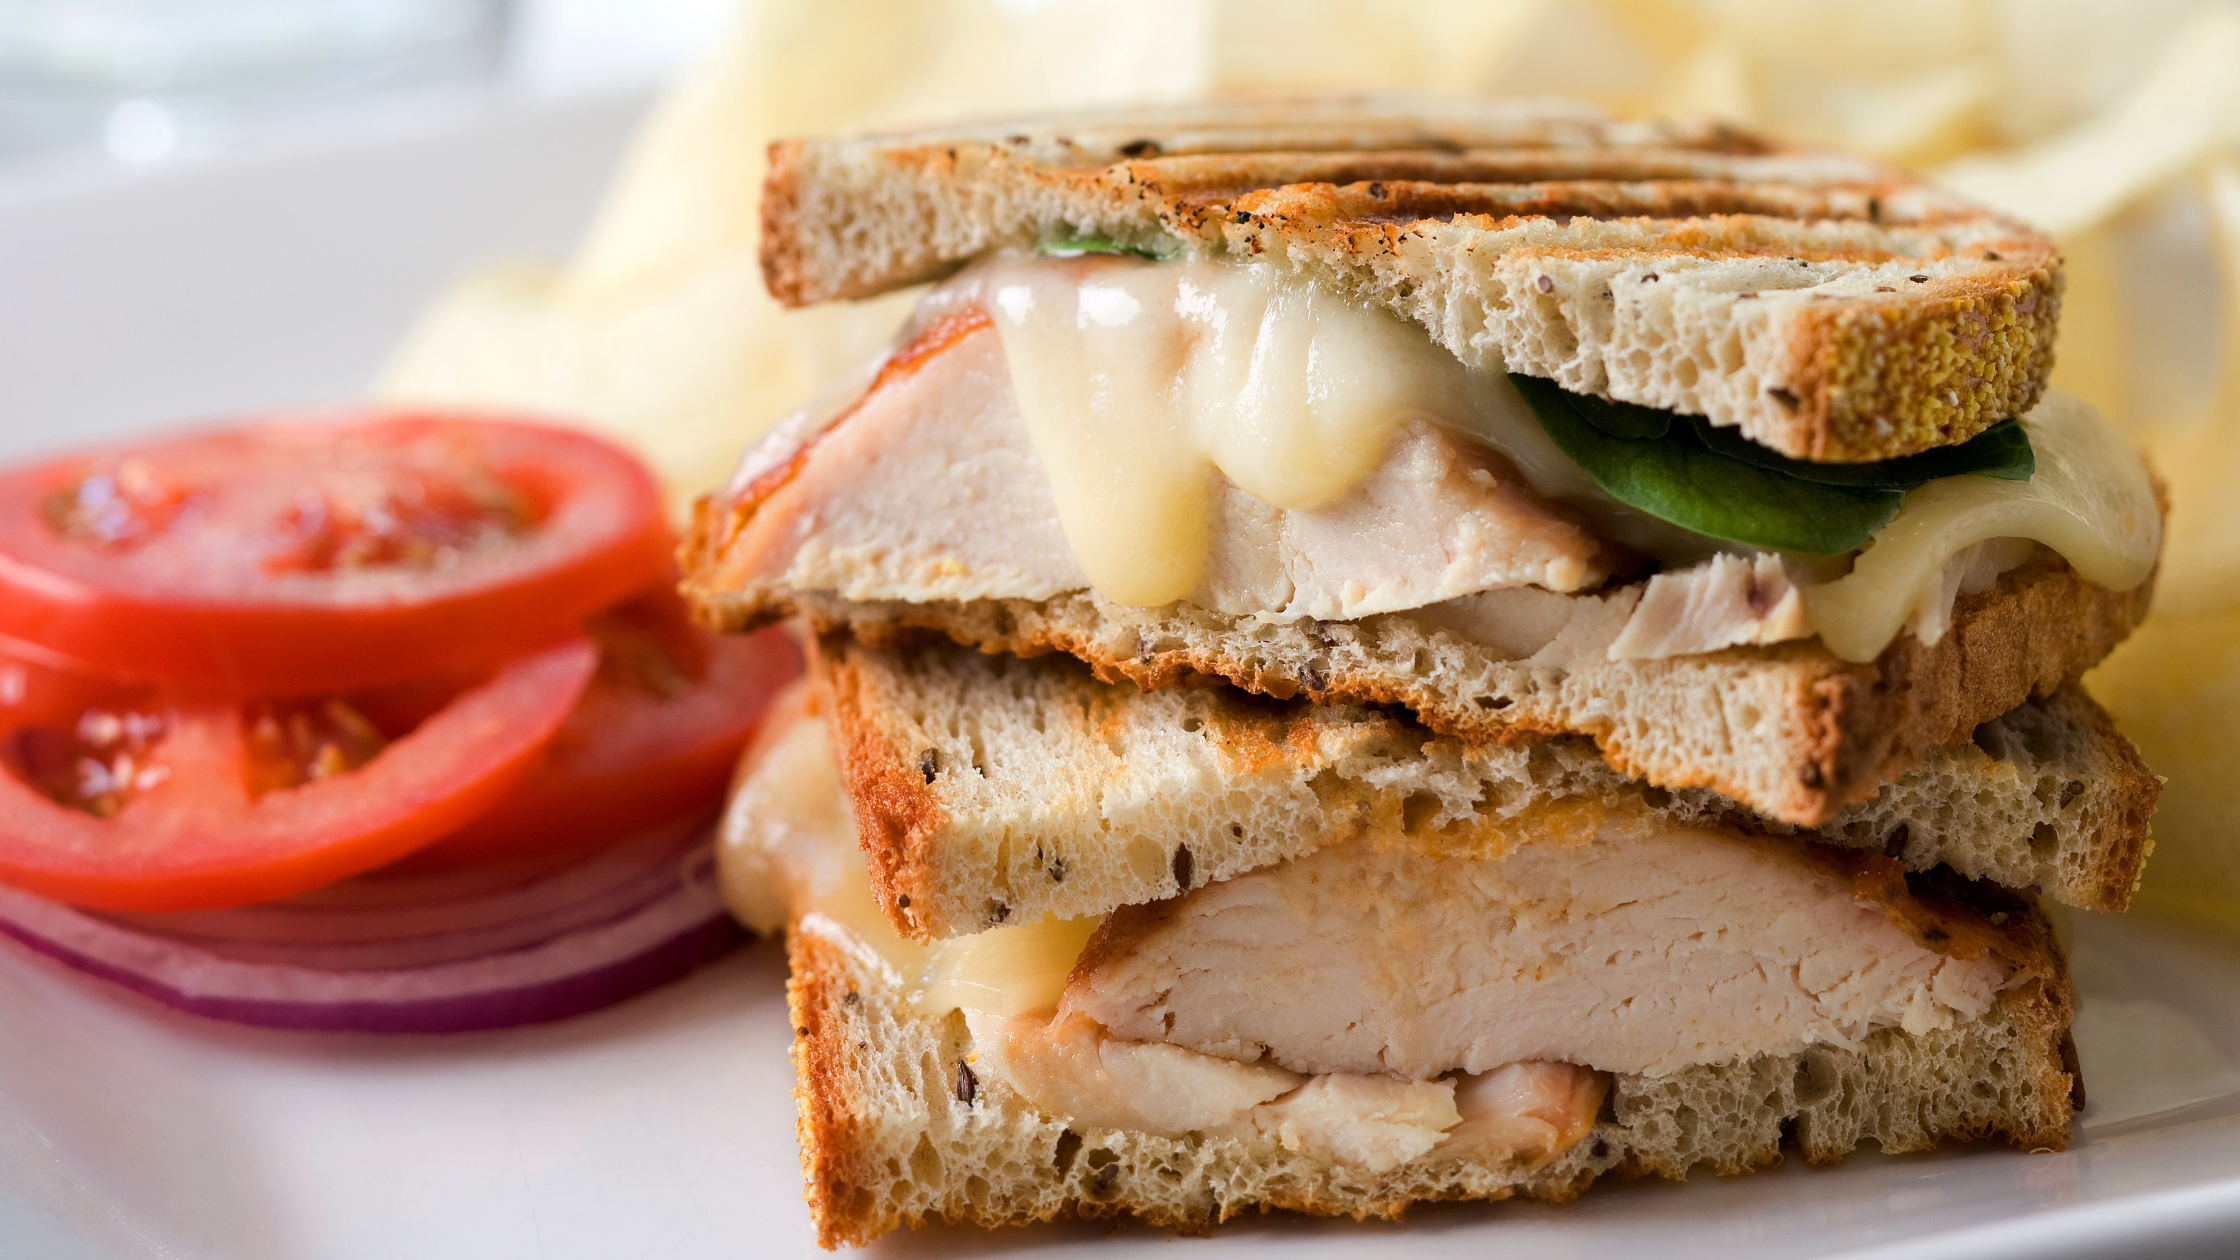 Flavorful Grilled Chicken & Brie Panini 7